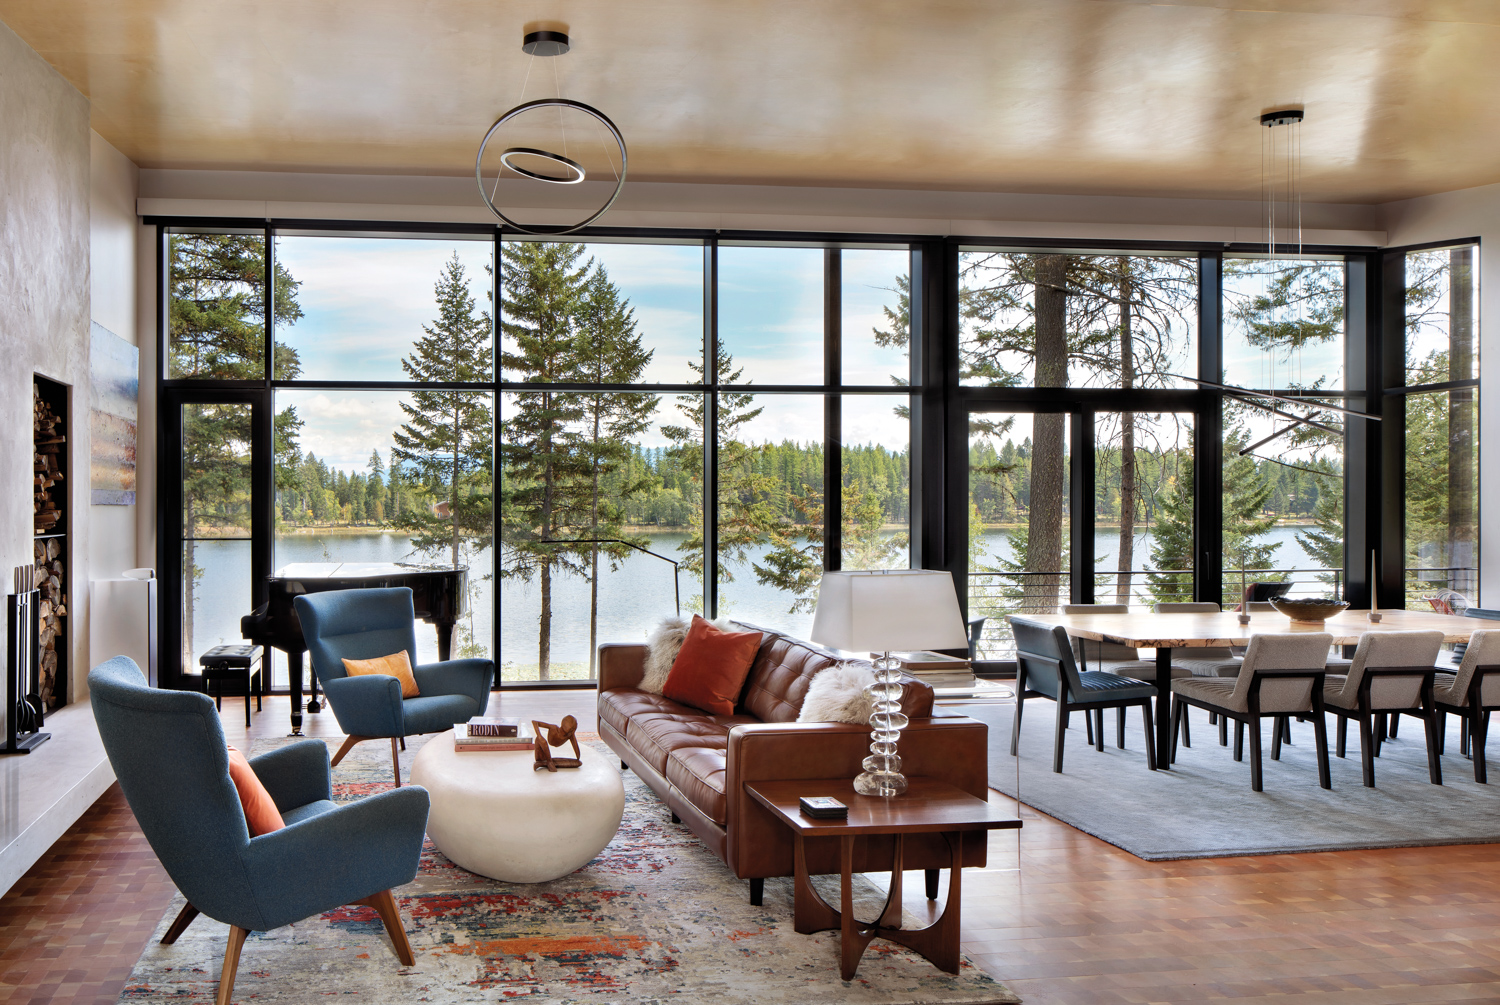 Large windows overlook a forested...